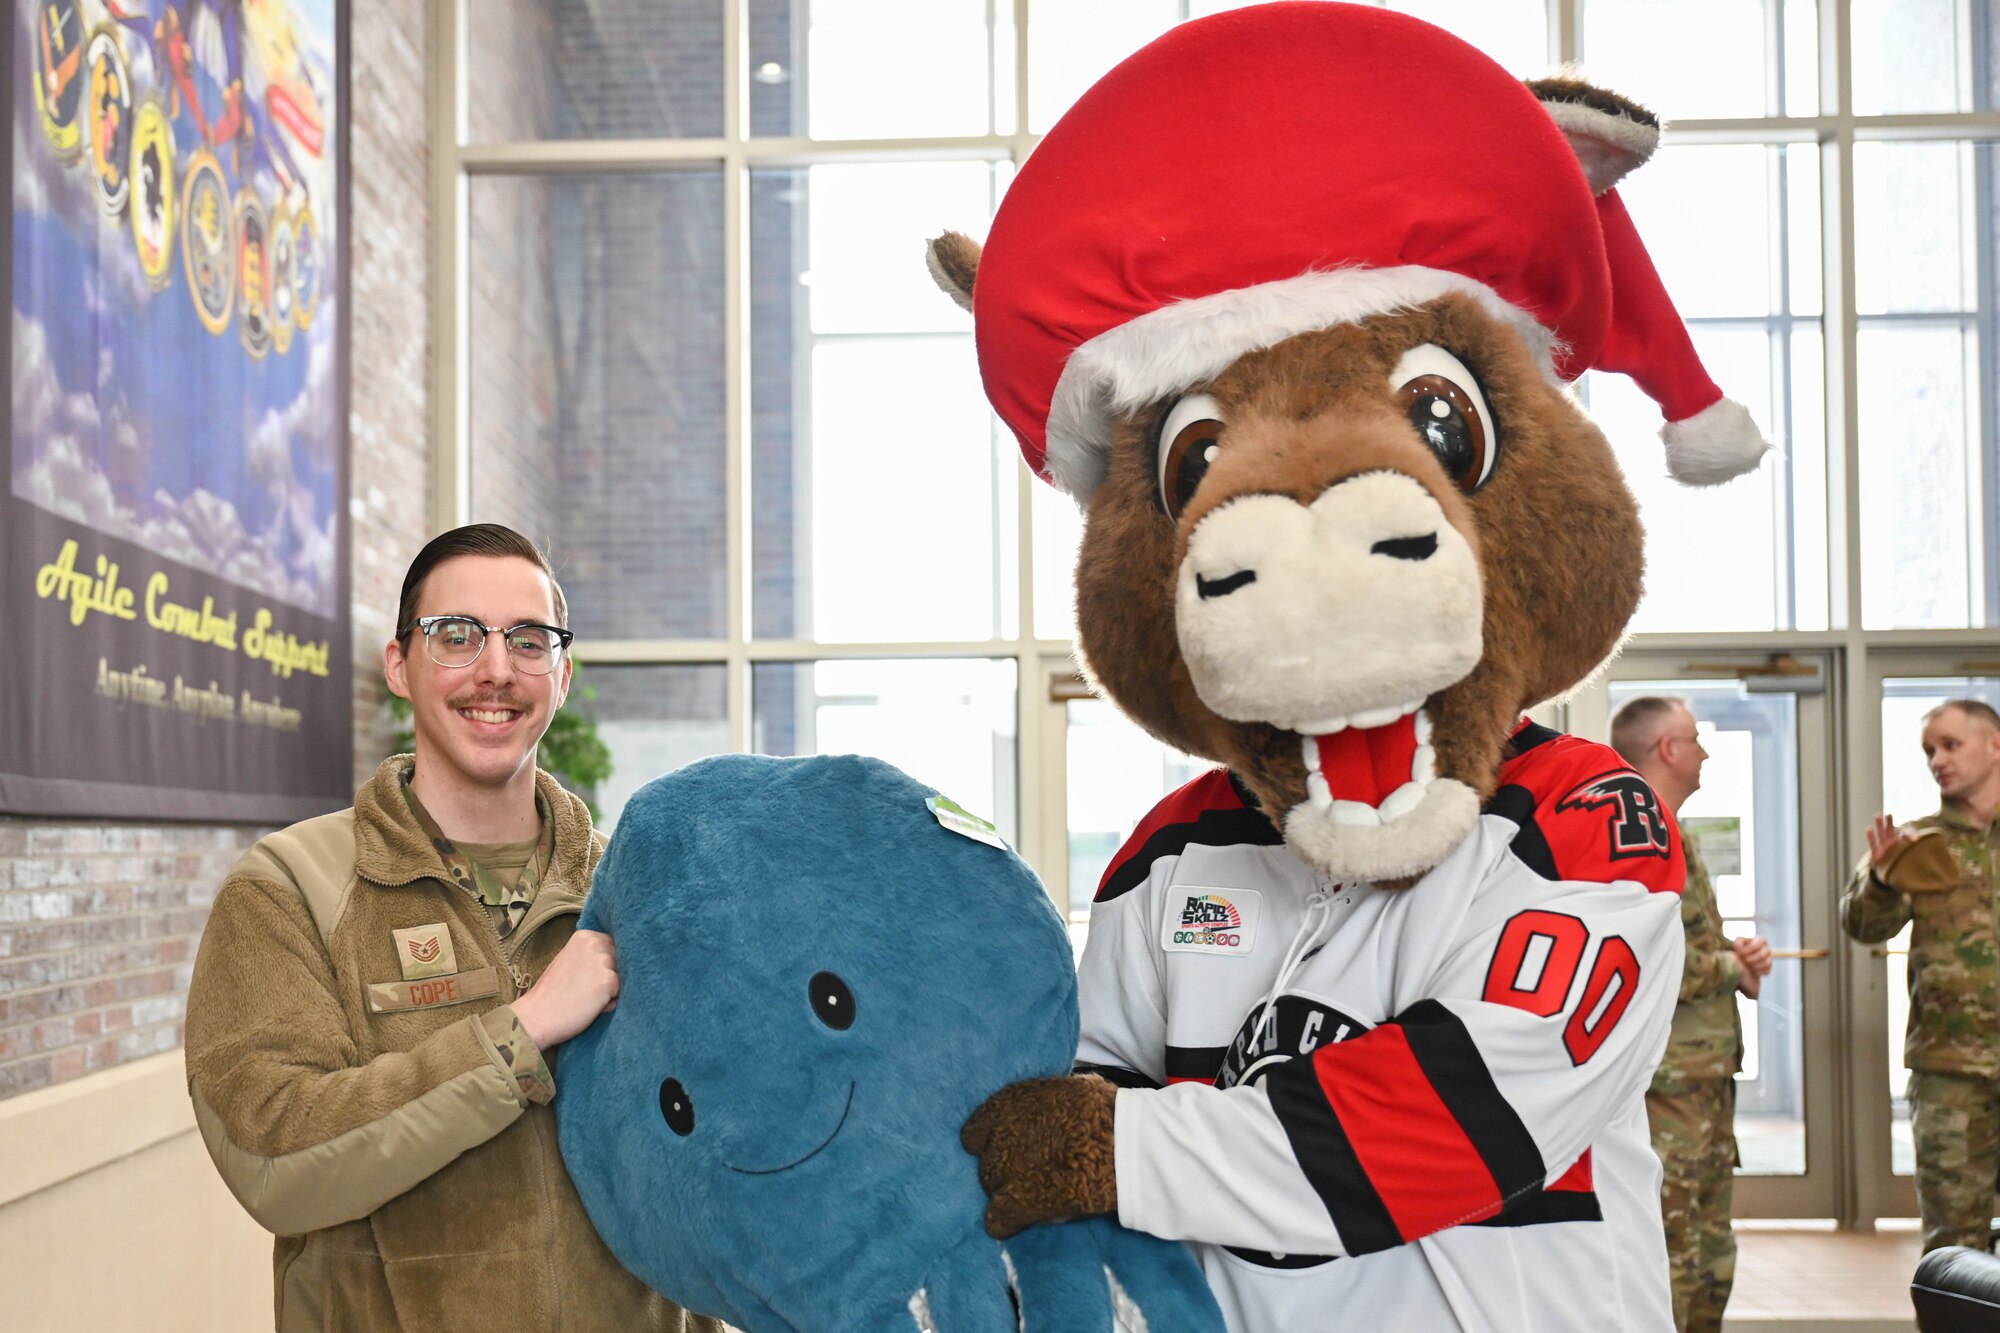 Tech Sgt. Alec Cope, 28th Comptroller Squadron noncommissioned officer in charge of financial analysis, poses for a photo with Nugget, Rapid City Rush Hockey Team mascot, at Ellsworth Air Force Base, South Dakota, Dec. 21, 2022. Members of the Rapid City Rush Hockey Team and Black Hills Energy donated 250 teddy bears for military families who currently have a family member deployed. (U.S. Air Force photo by Airman 1st Class Dylan Maher)